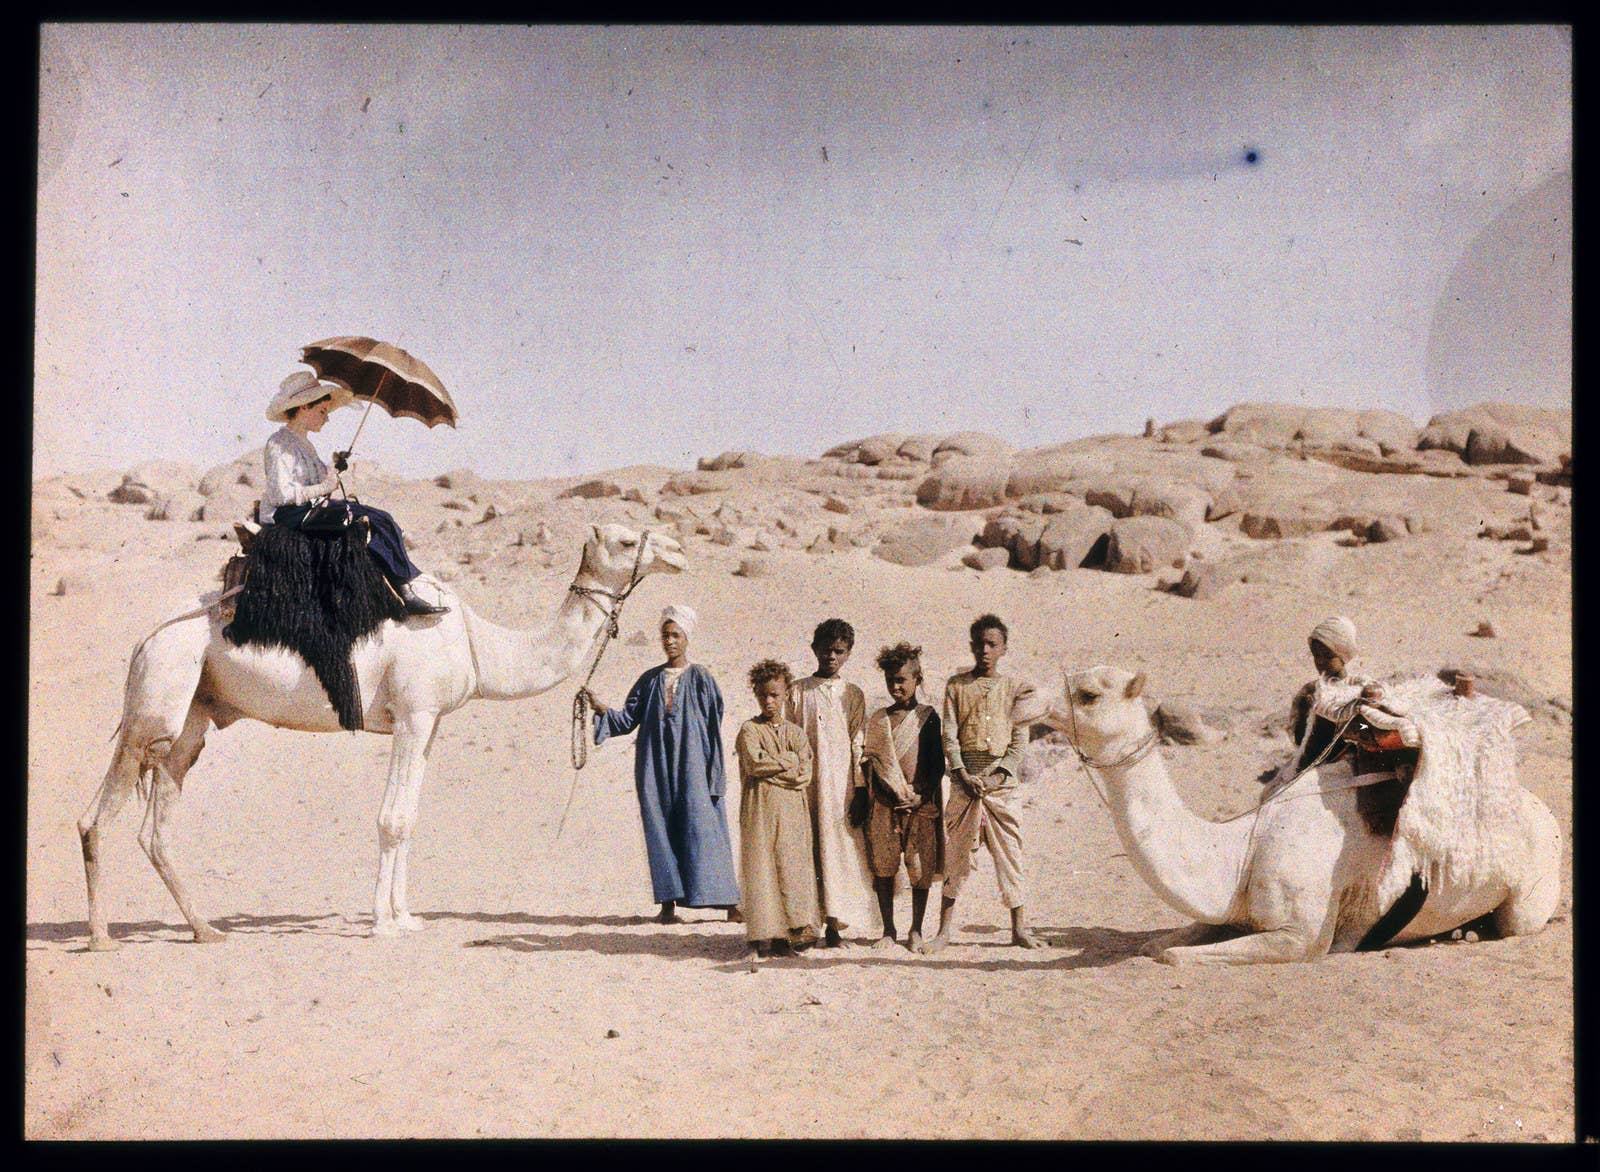 Autochrome of a scene in Egypt by Friedrich Paneth, 1913.